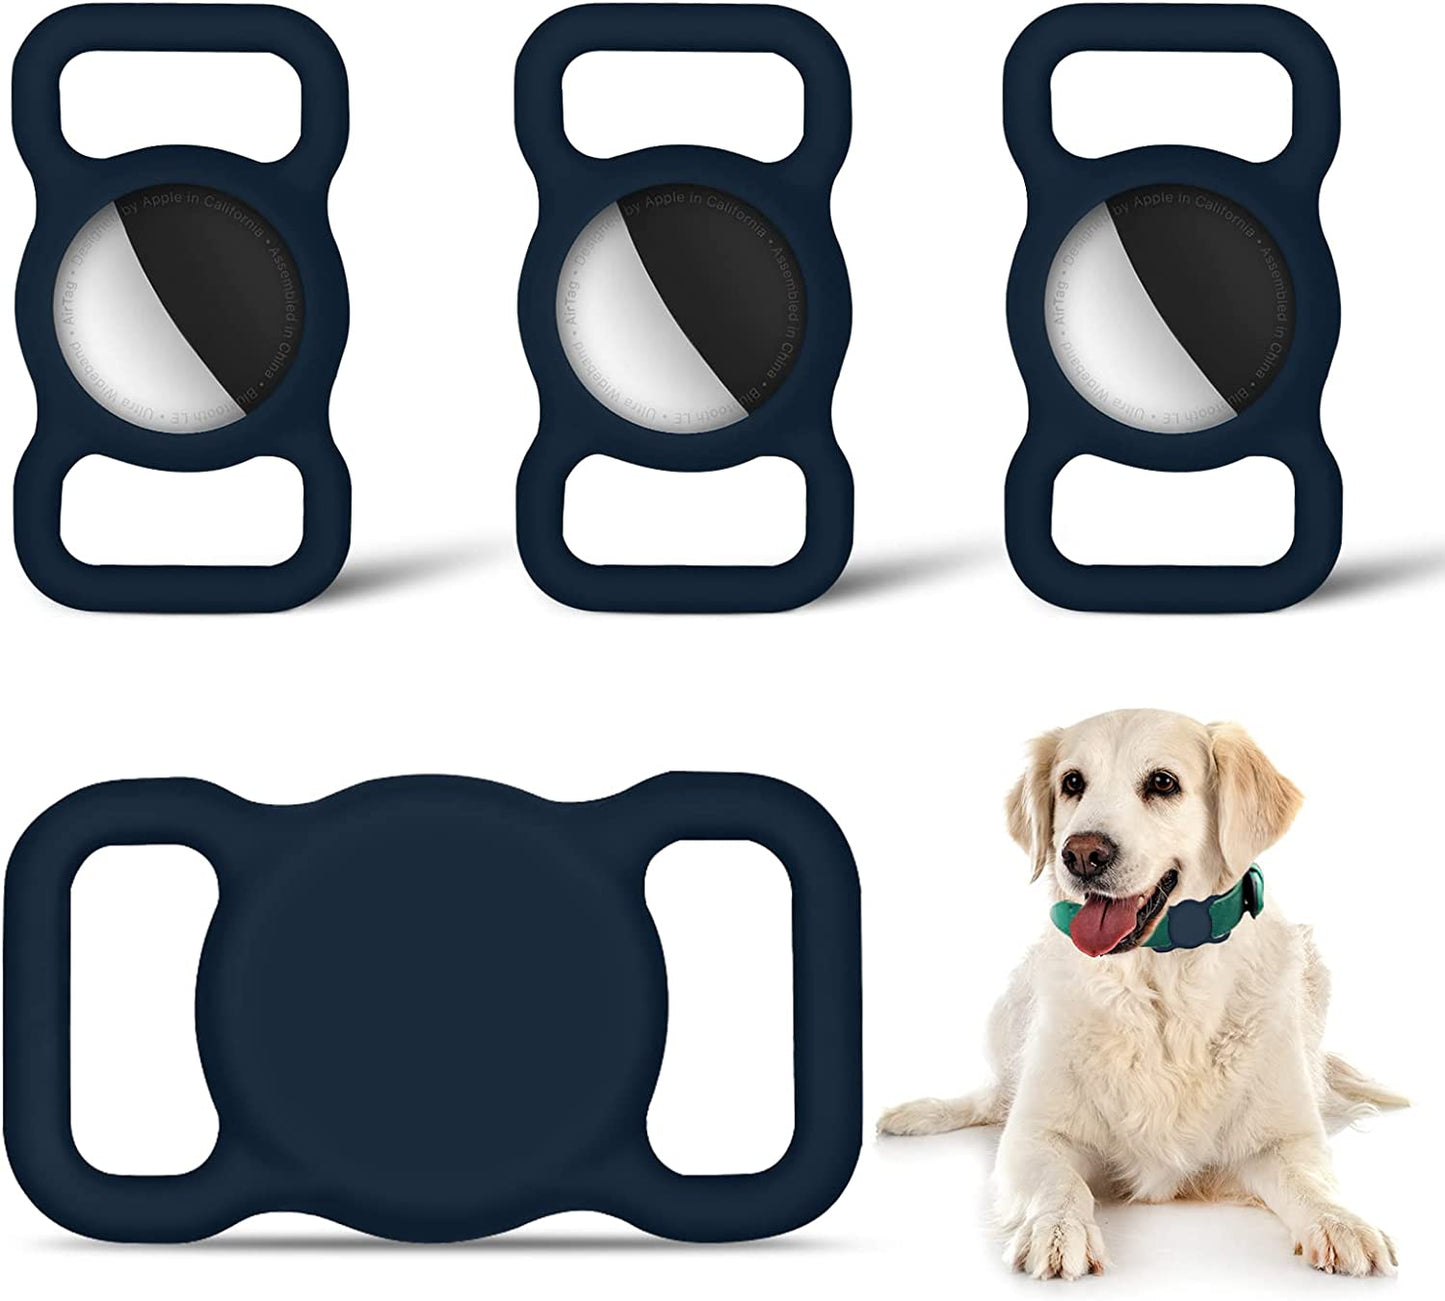 Case for Airtag Dog Collar Holder, Airtag Holder Silicone Non-Shake Protective Cover for Dog Cat Pet Loop Collar, School Bag Strap Band, Compatible with Apple Airtag Case for Dog Collar (Blue-2Pack) Electronics > GPS Accessories > GPS Cases D DOMISOL Blue 4 pack 